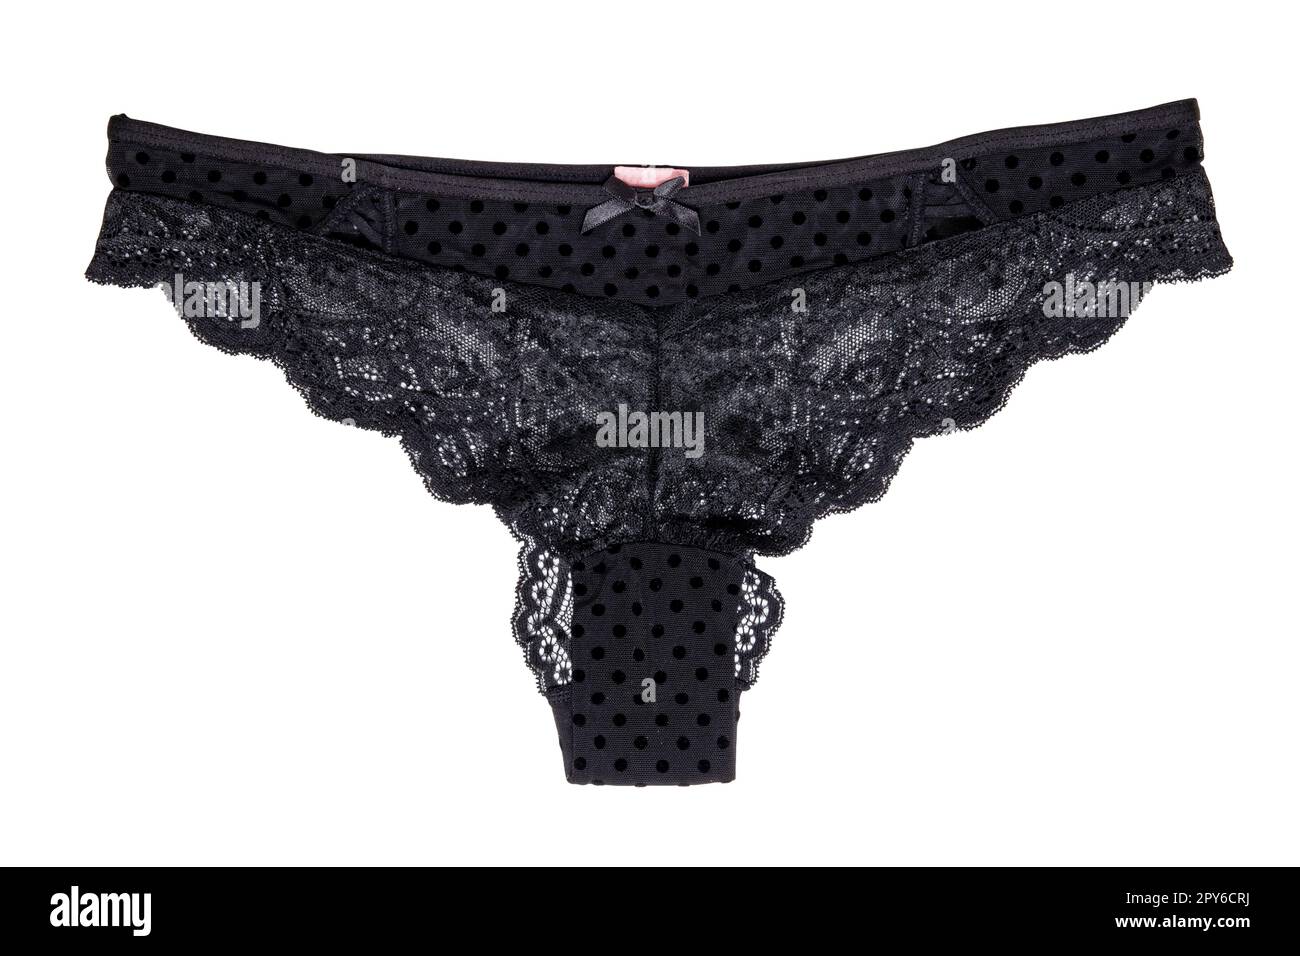 Underwear woman isolated. Close-up of luxurious elegant black lacy thongs panties isolated on a white background. Clipping path. Underwear fashion. Stock Photo